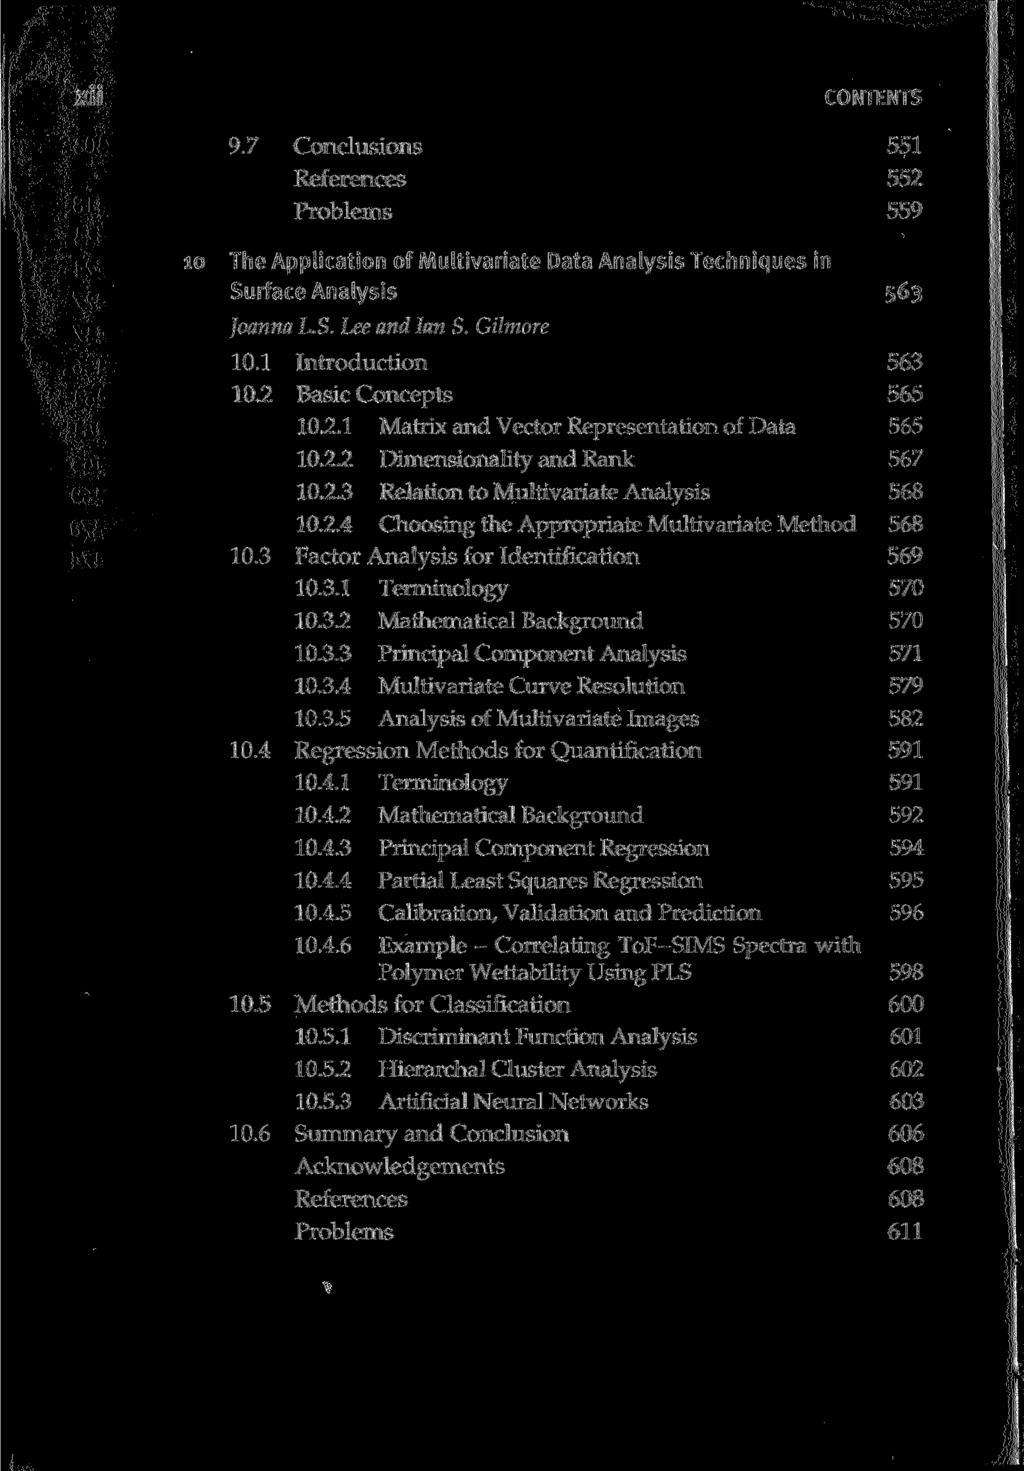 xii CONTENTS 9.7 Conclusions 551 References 552 Problems 559 lo The Application of Multivariate Data Analysis Techniques in Surface Analysis 563 Joanna L.S. Lee and Ian S. Gilmore 10.